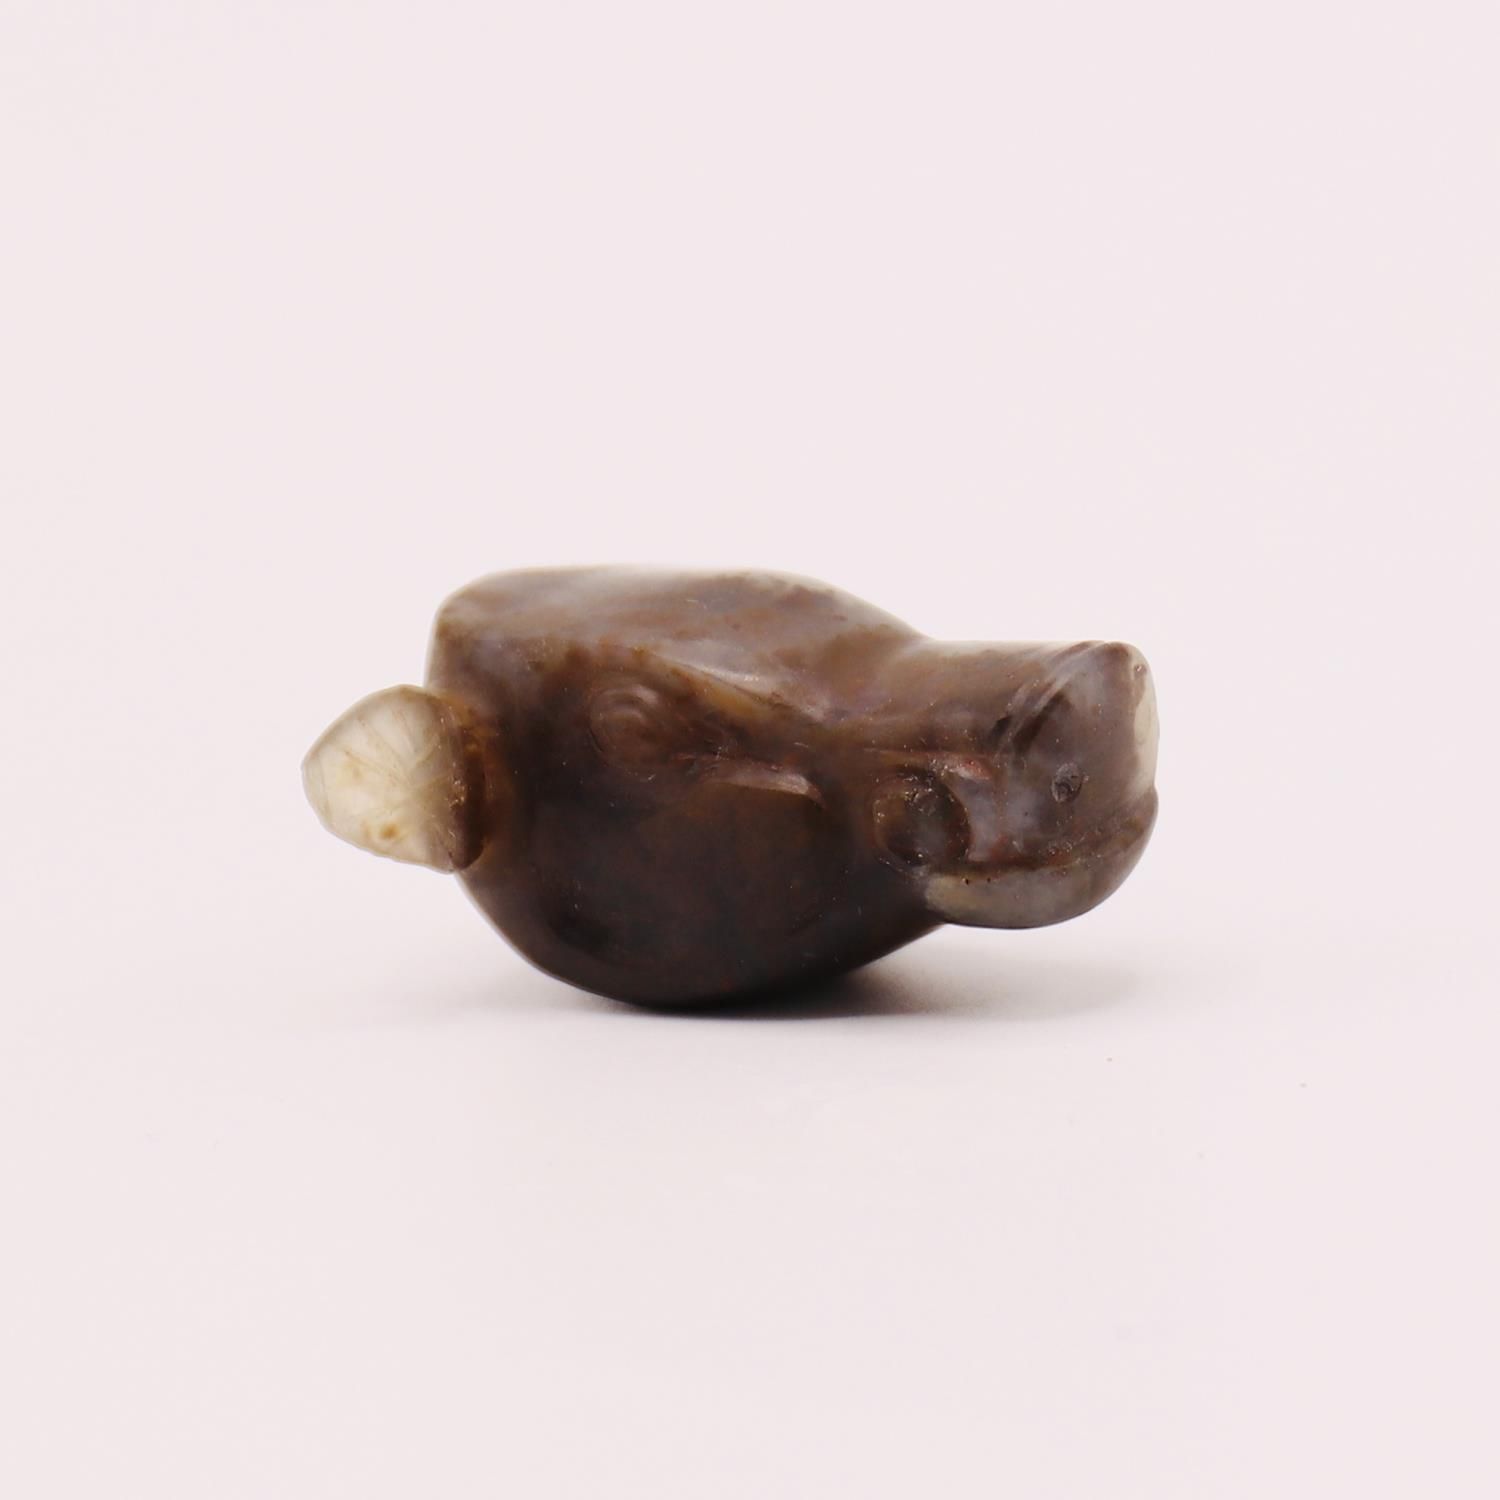 A GREEK AGATE COW HEAD AMULET, 5TH CENTURY A.D. OR LATER GRIECHISCHES KUHKOPF-AM&hellip;